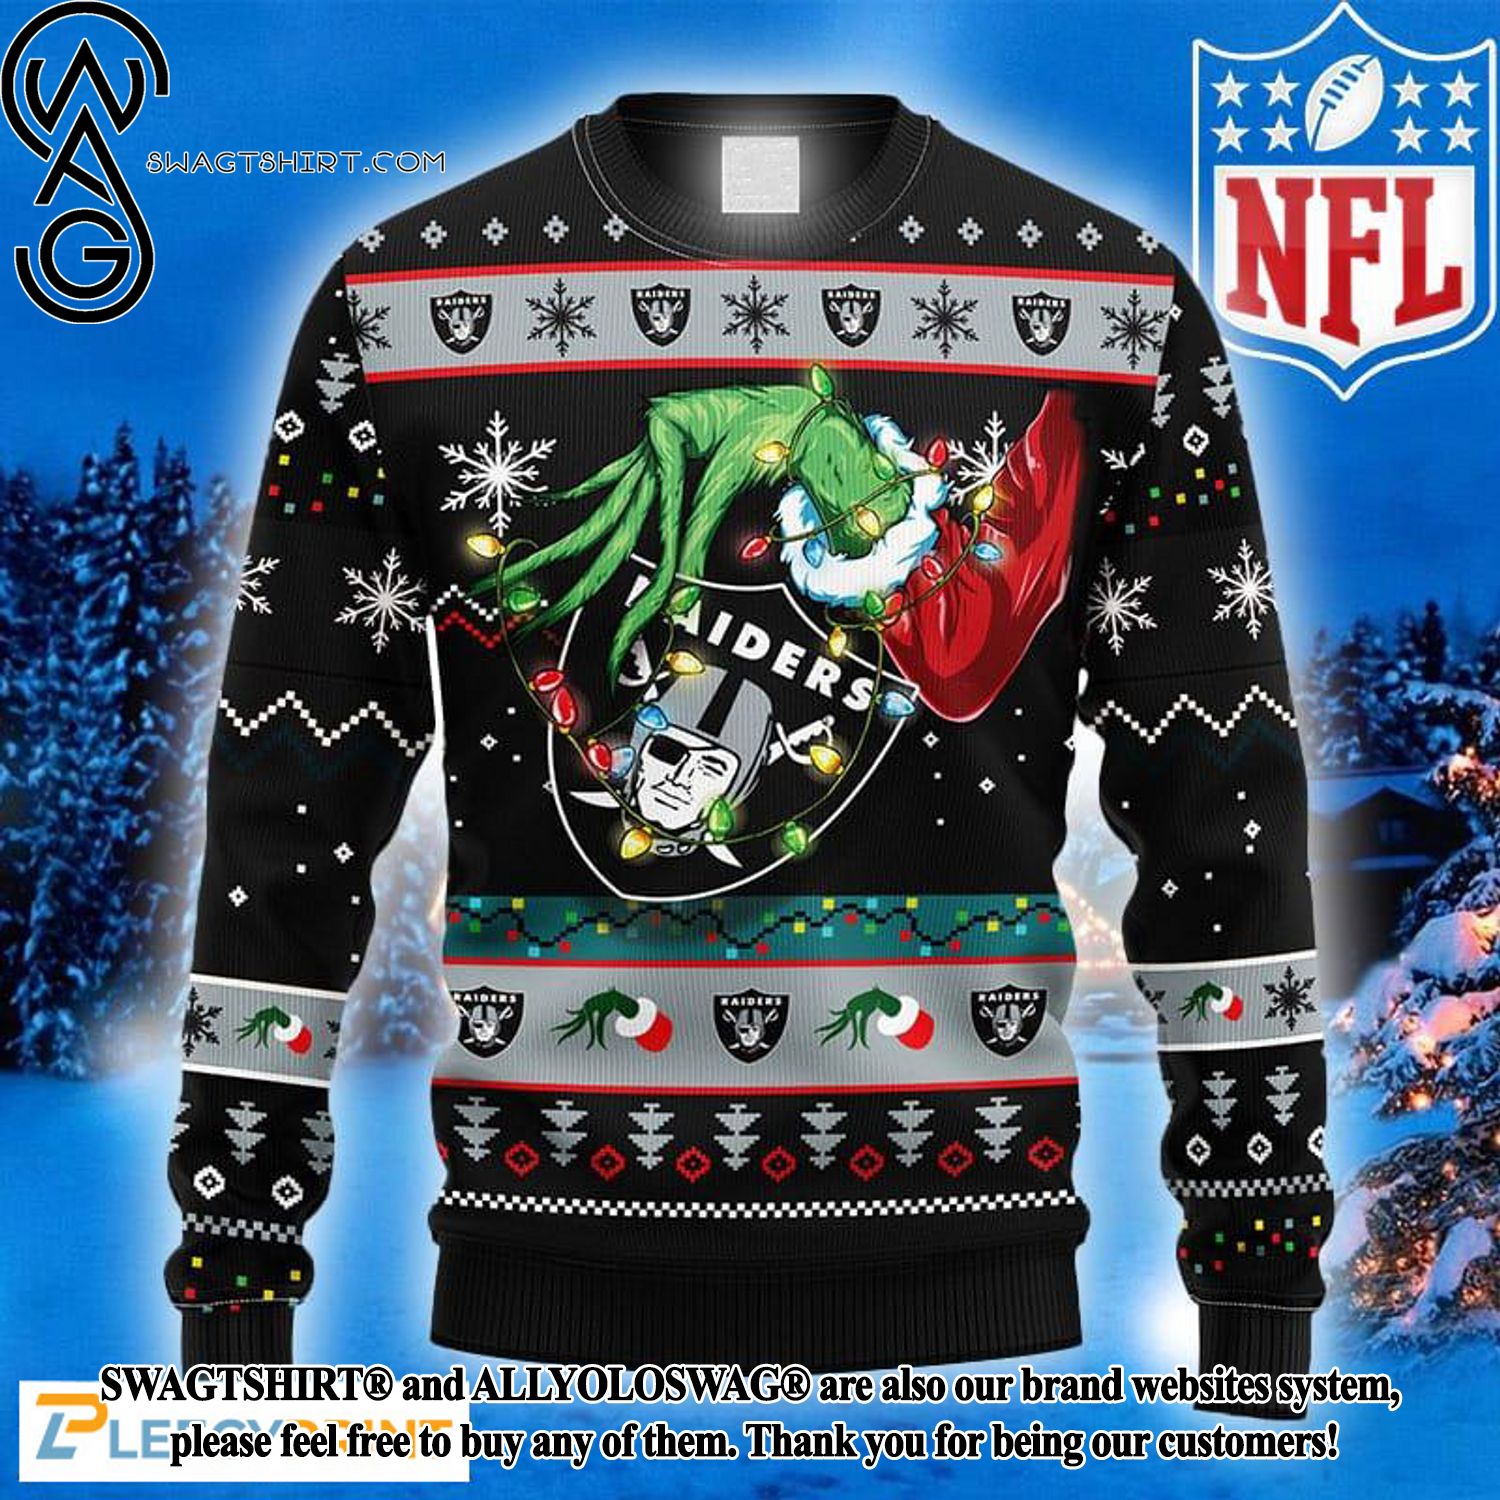 Grinch Decor Las Vegas Raiders NFL Personalized Knitted Christmas Sweater  Gift Fans - Banantees